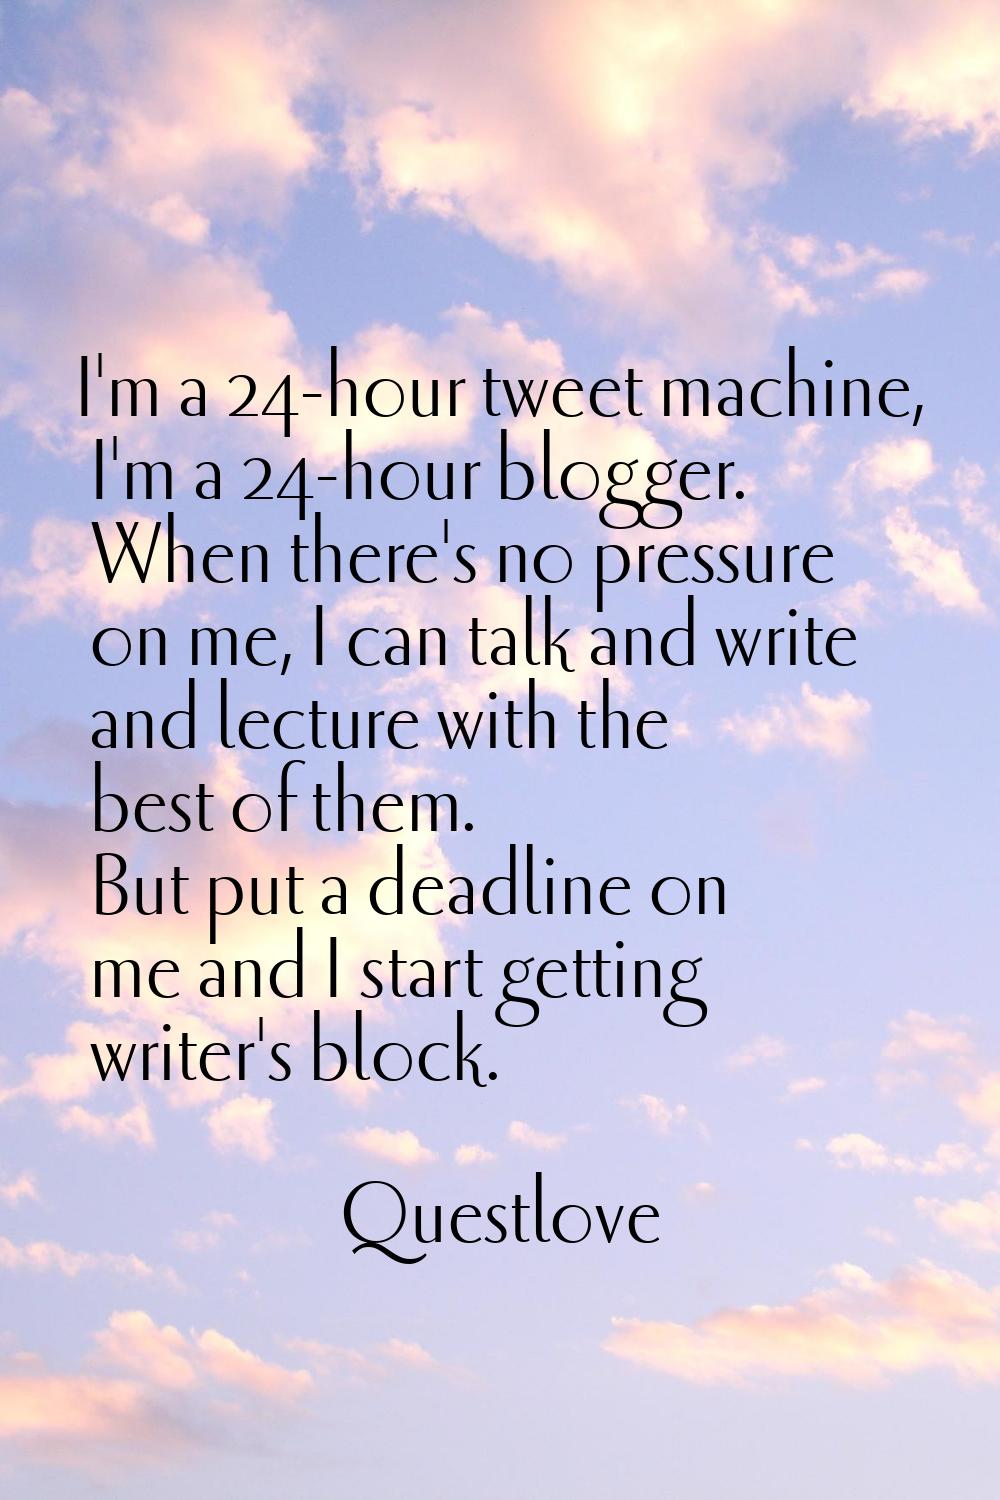 I'm a 24-hour tweet machine, I'm a 24-hour blogger. When there's no pressure on me, I can talk and 